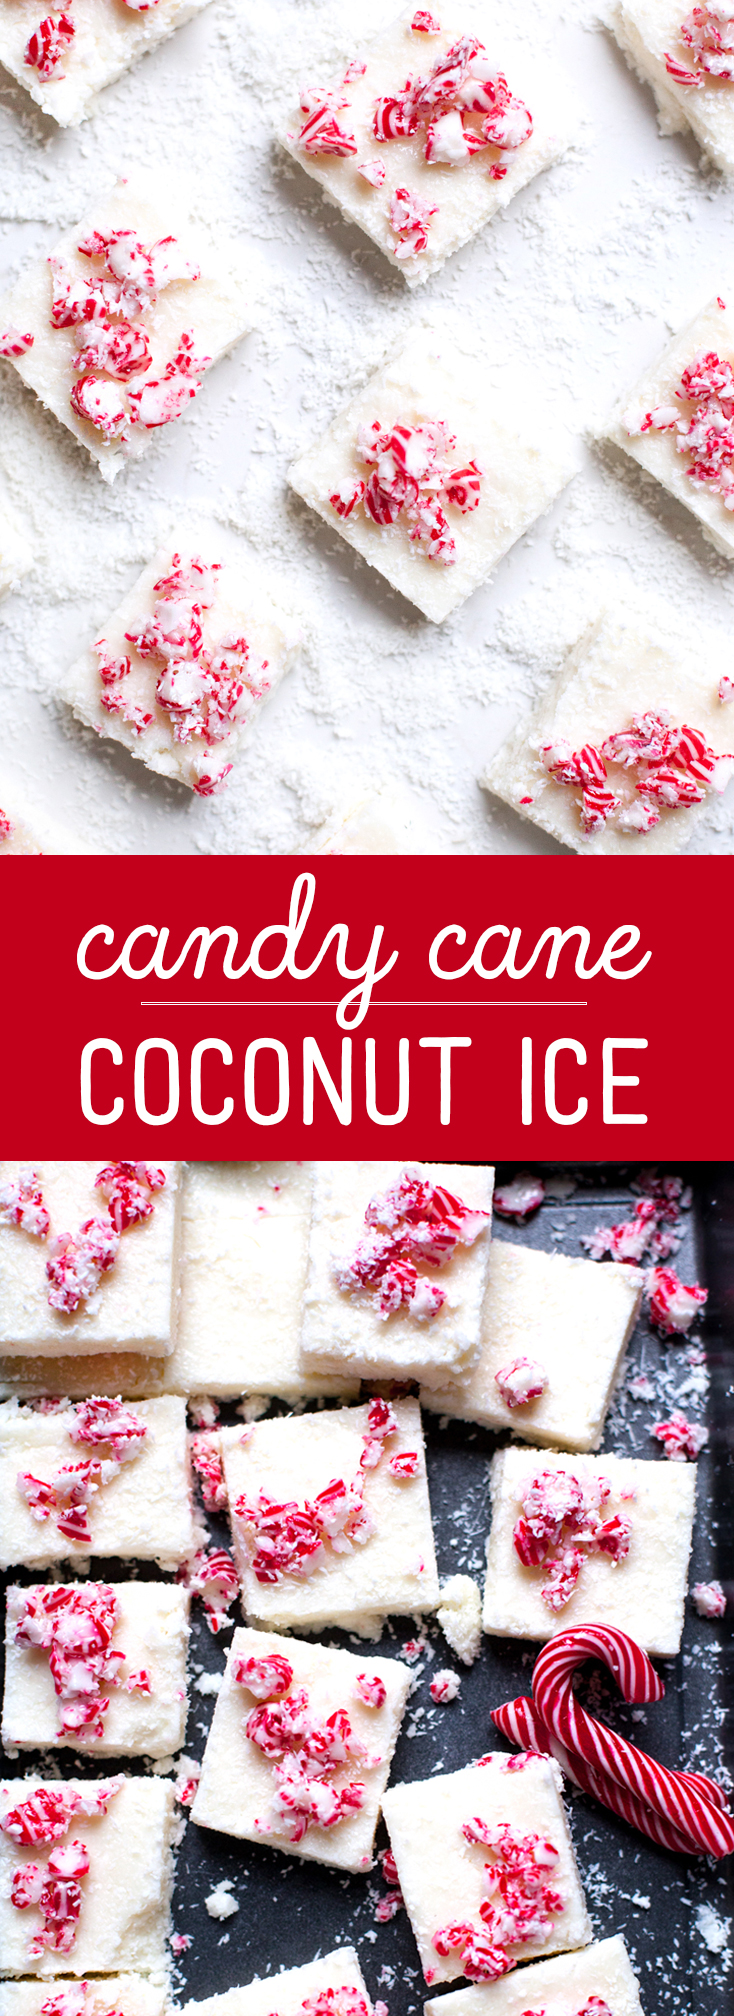 Candy Cane Coconut Ice - Great teachers gift for xmas